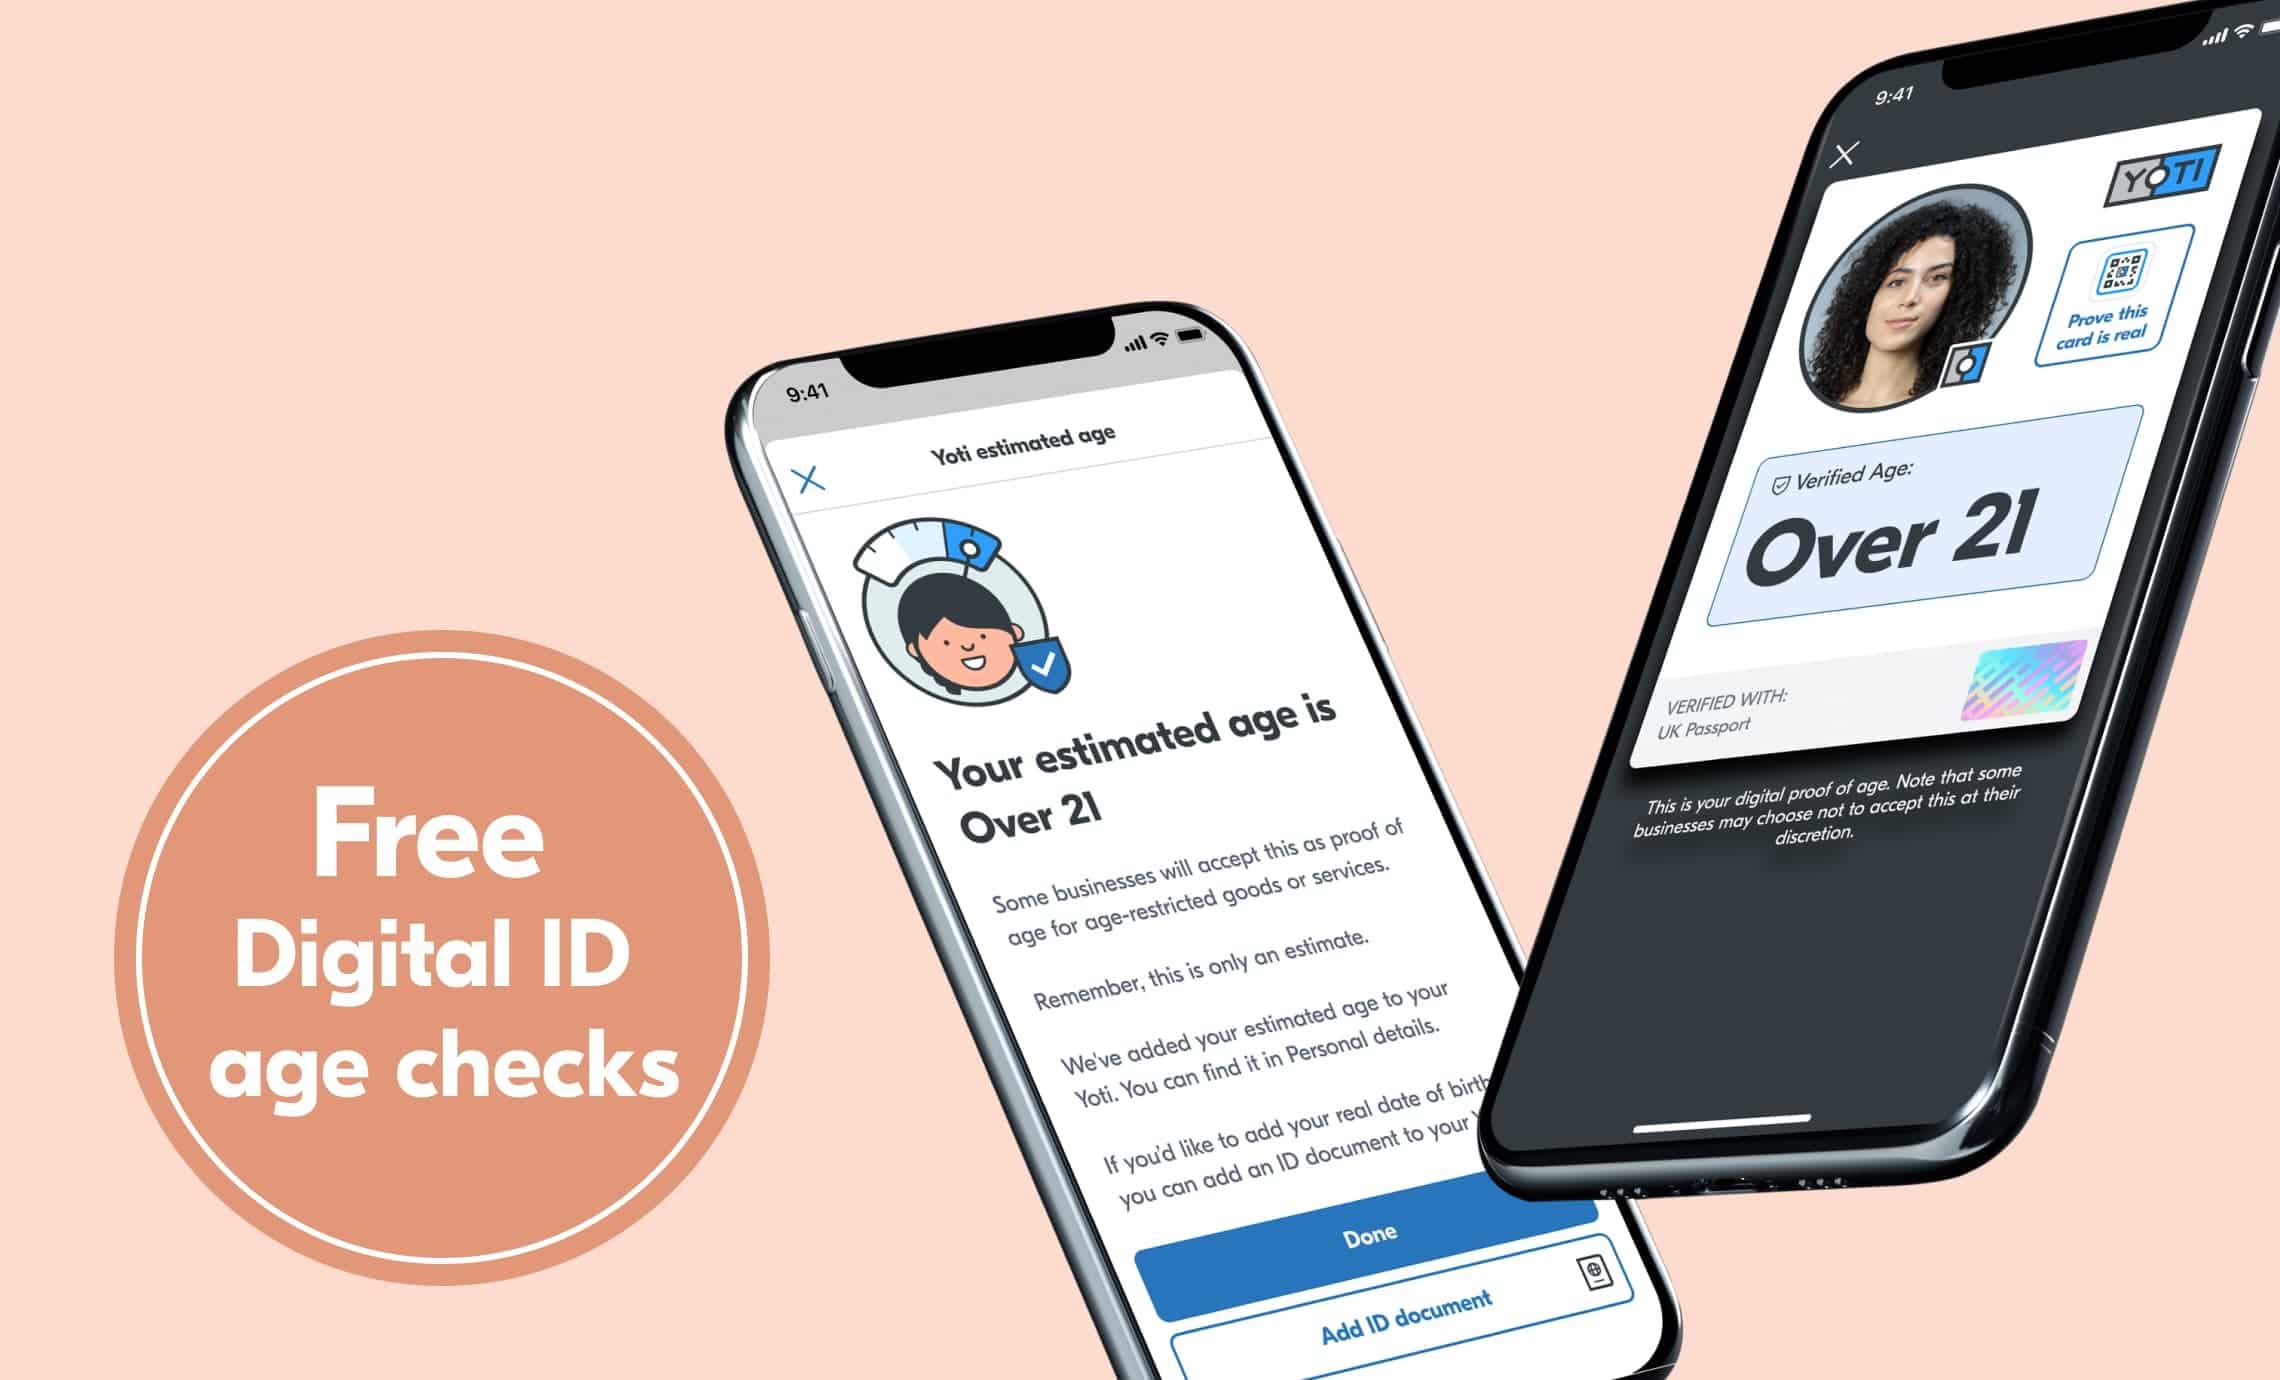 Free digital ID age checks poster with two smartphones showing two methods of age checks: Age estimation and Digital ID verified "age over" attributes